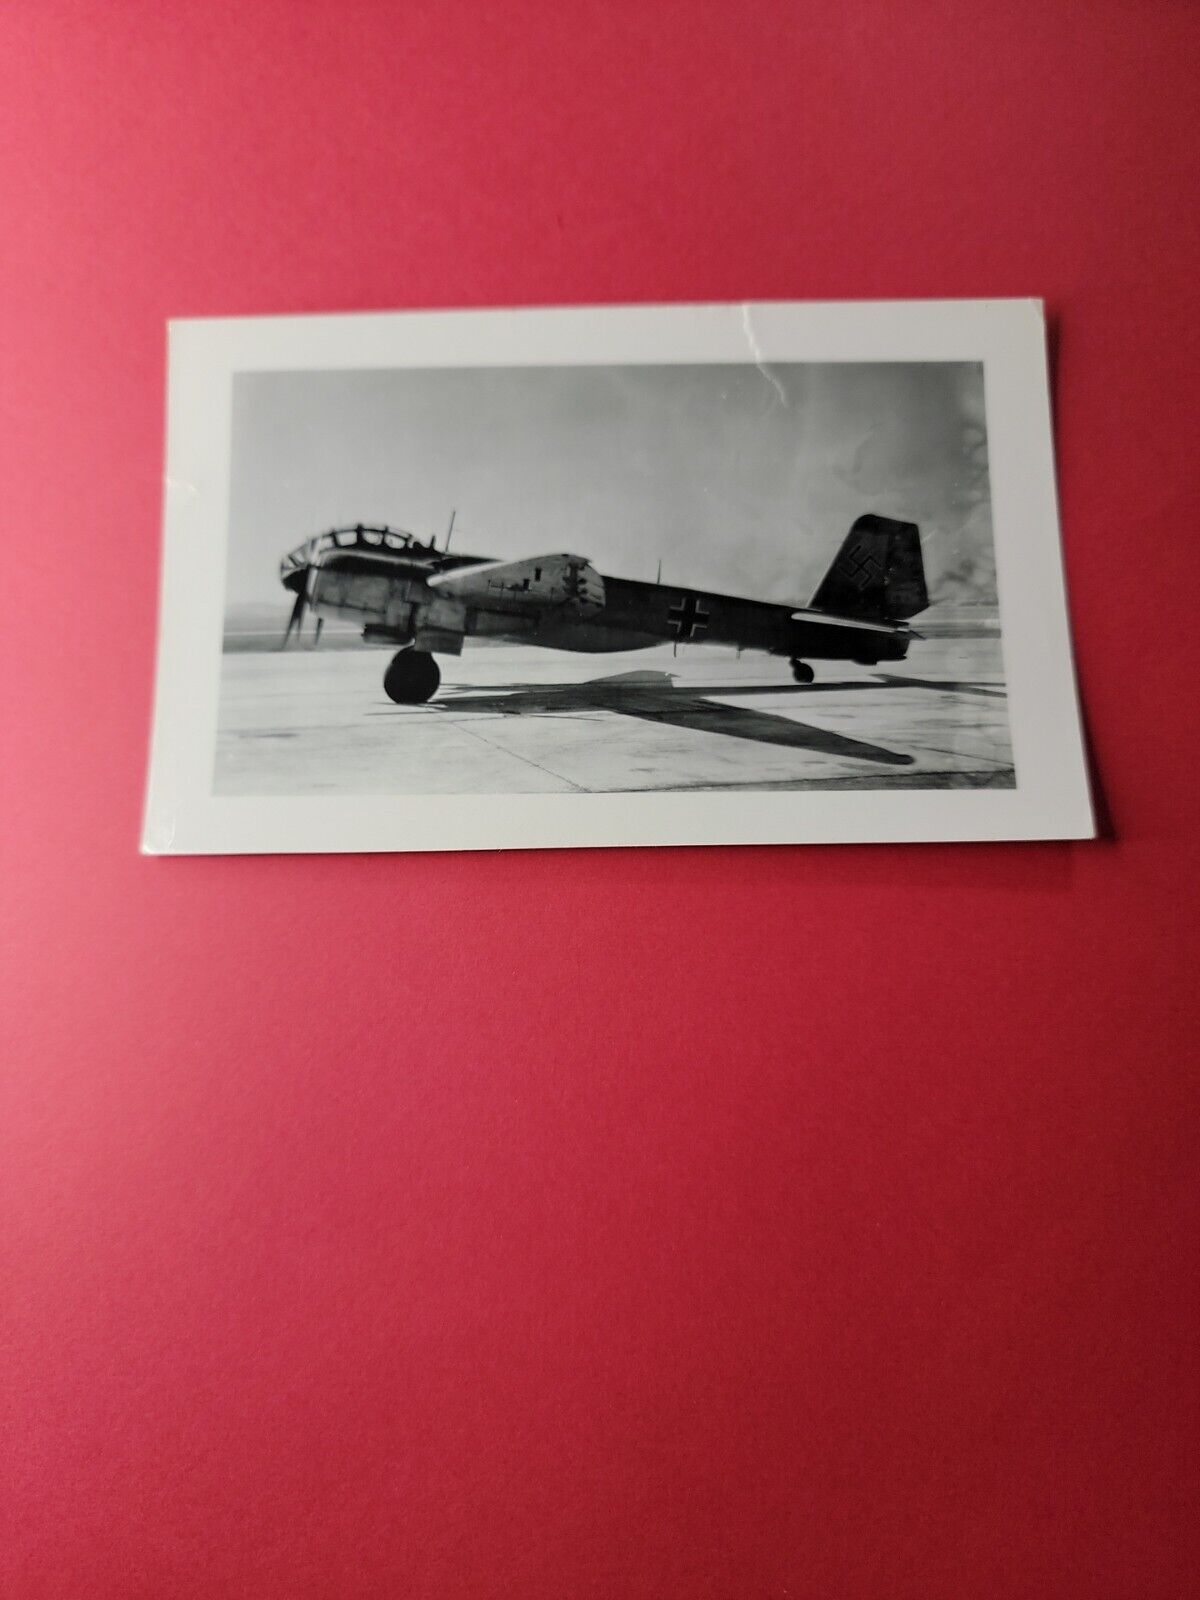 OFFICIAL JUNKERS JU 388 photograph NUMBERED 2997